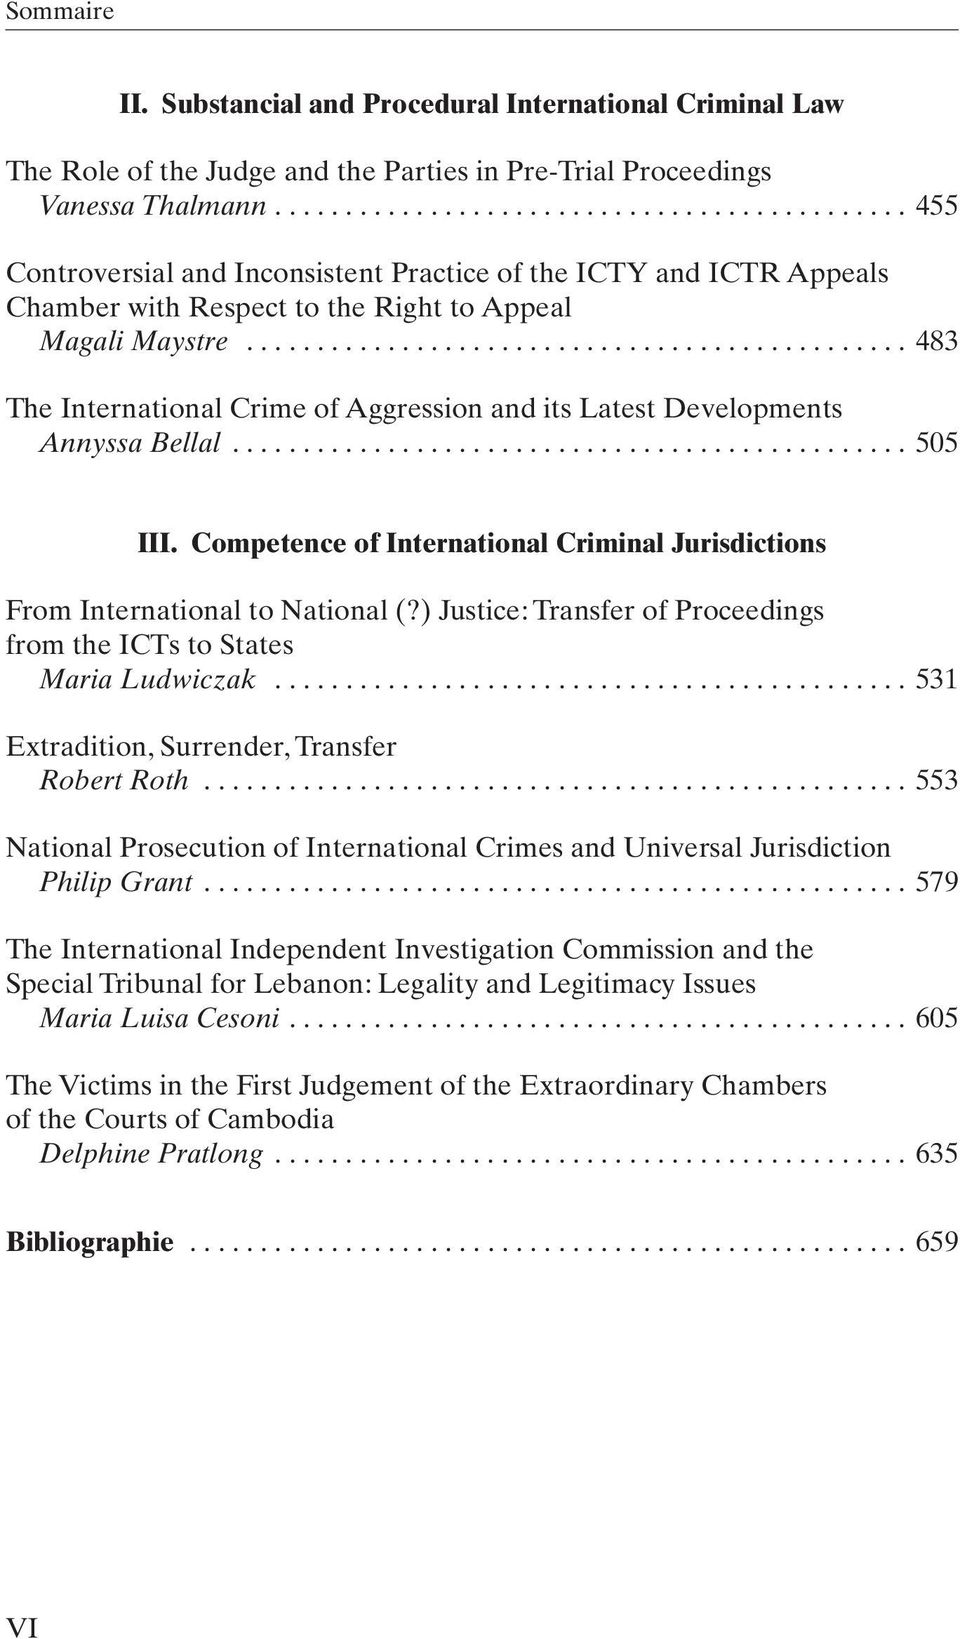 .. 483 The International Crime of Aggression and its Latest Developments Annyssa Bellal... 505 III. Competence of International Criminal Jurisdictions From International to National (?